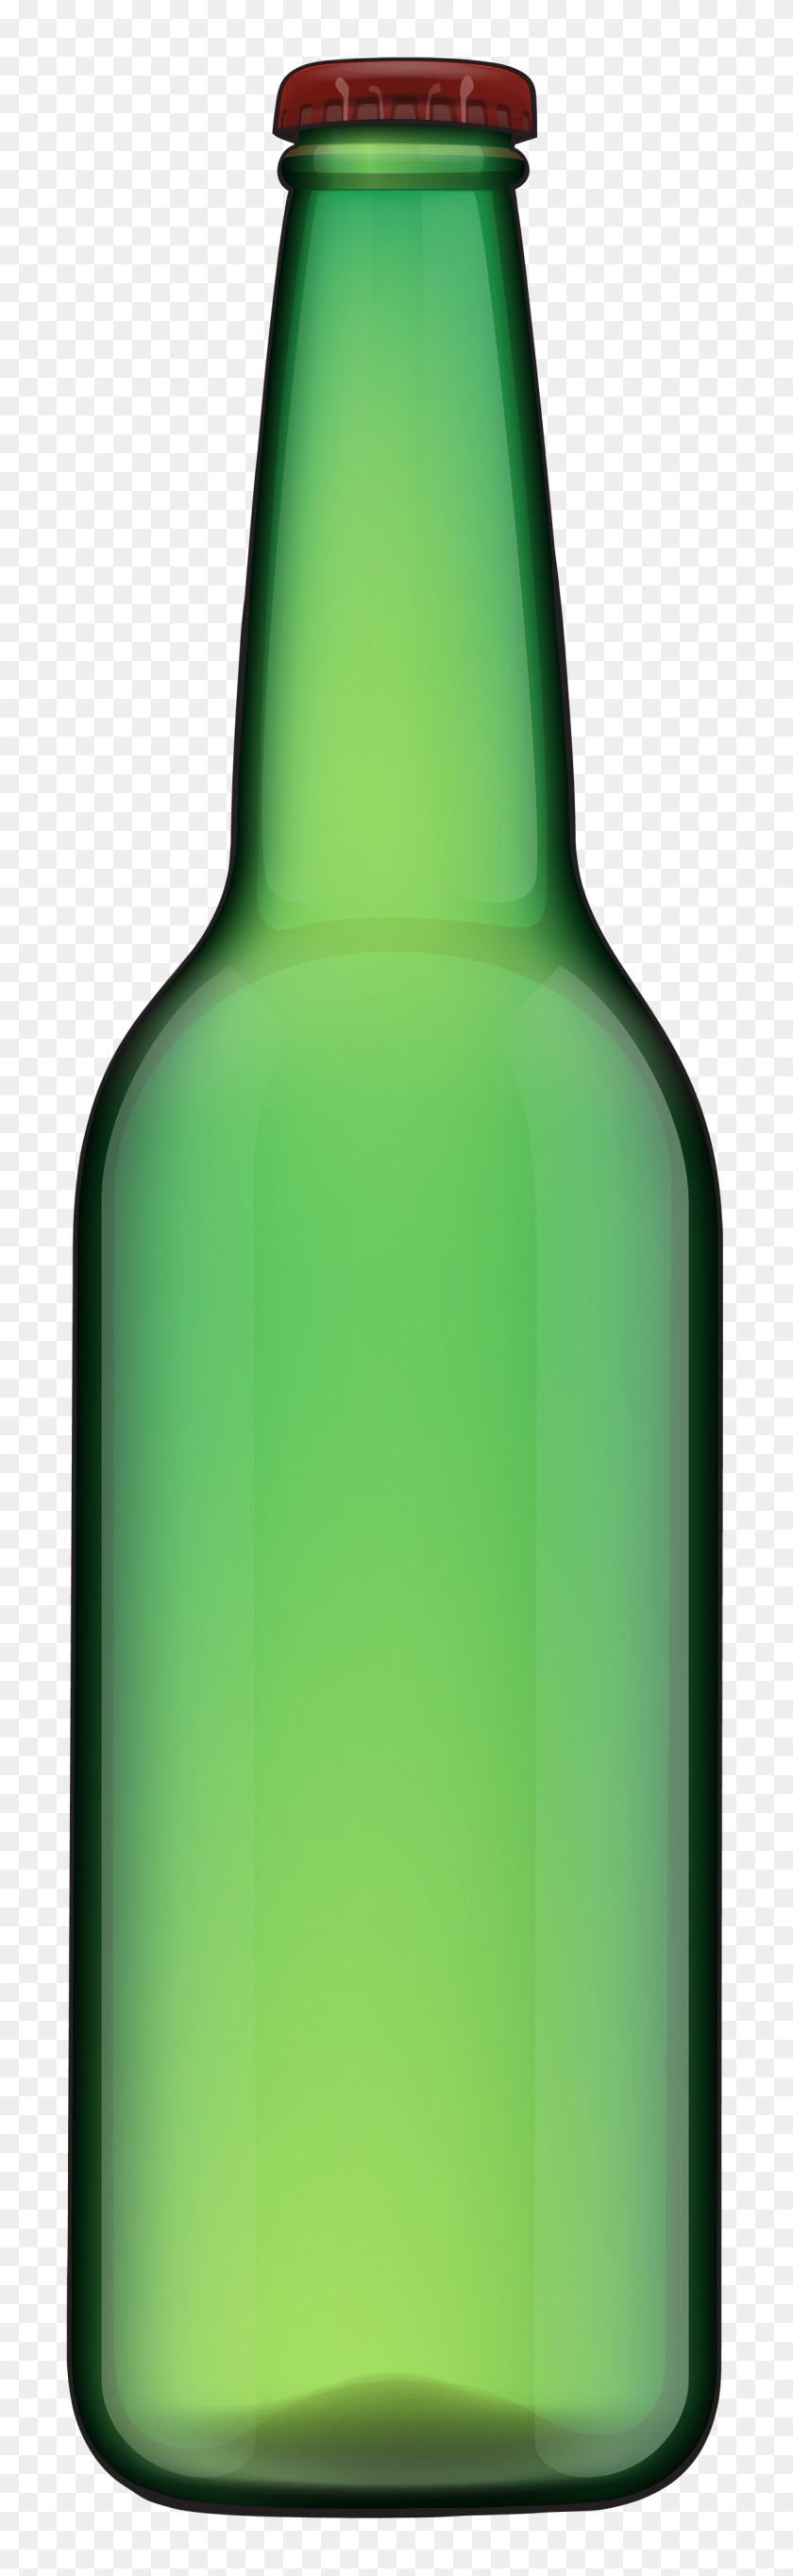 1169x4000 Green Beer Bottle Png Clipart Best Web Types Of Baby Bottles - Baby Bottle PNG